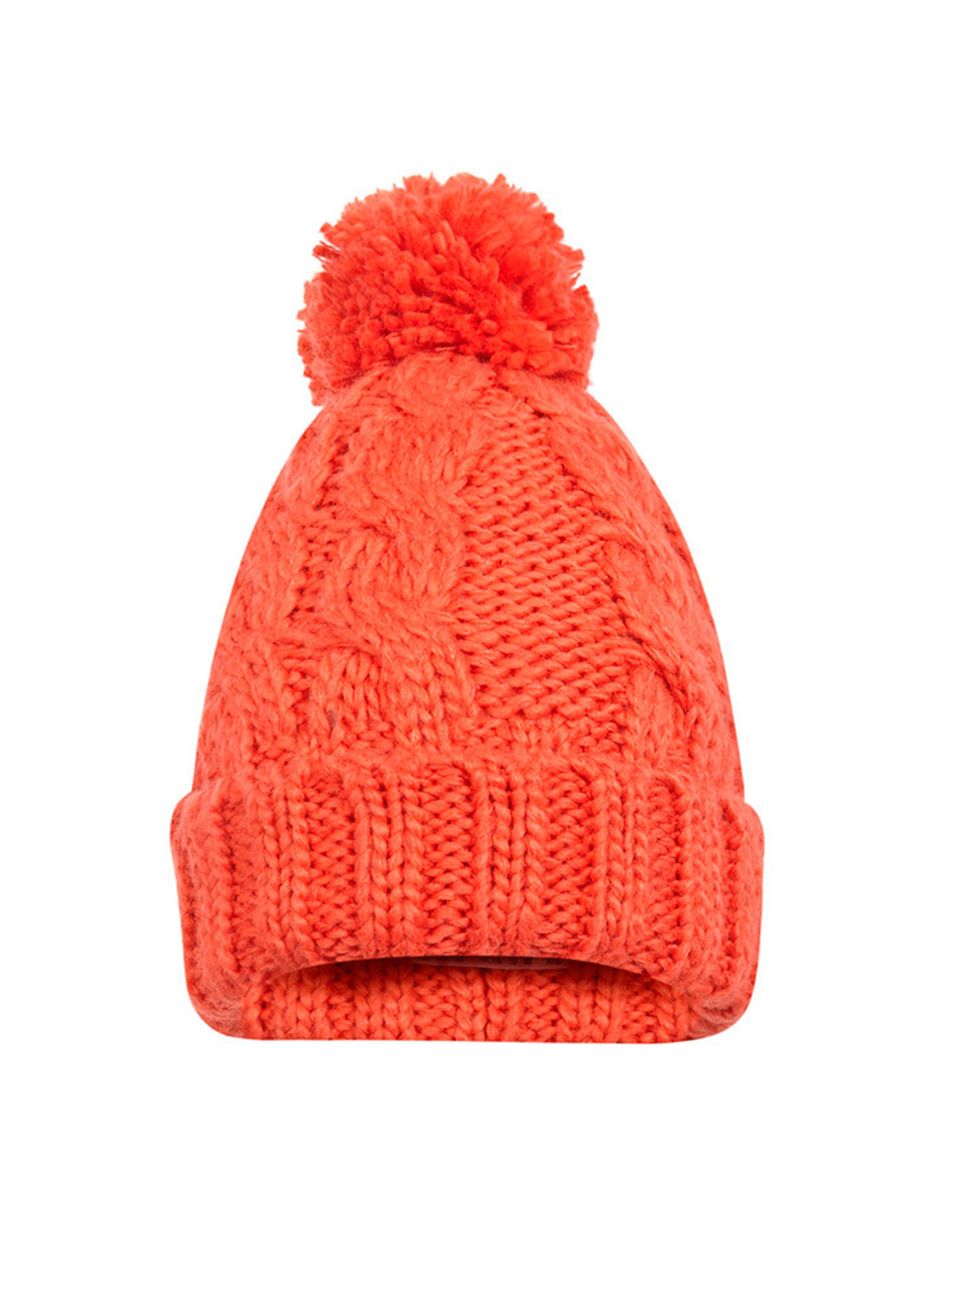 <p>Add some serious colour to your oufit.</p>

<p><a href="http://www.missselfridge.com/en/msuk/product/accessories-299050/hats-scarves-gloves-2469016/redturn-up-beanie-3083308?bi=1&amp;ps=40" target="_blank">Miss Selfridge bobble hat</a>, &pound;12.</p>